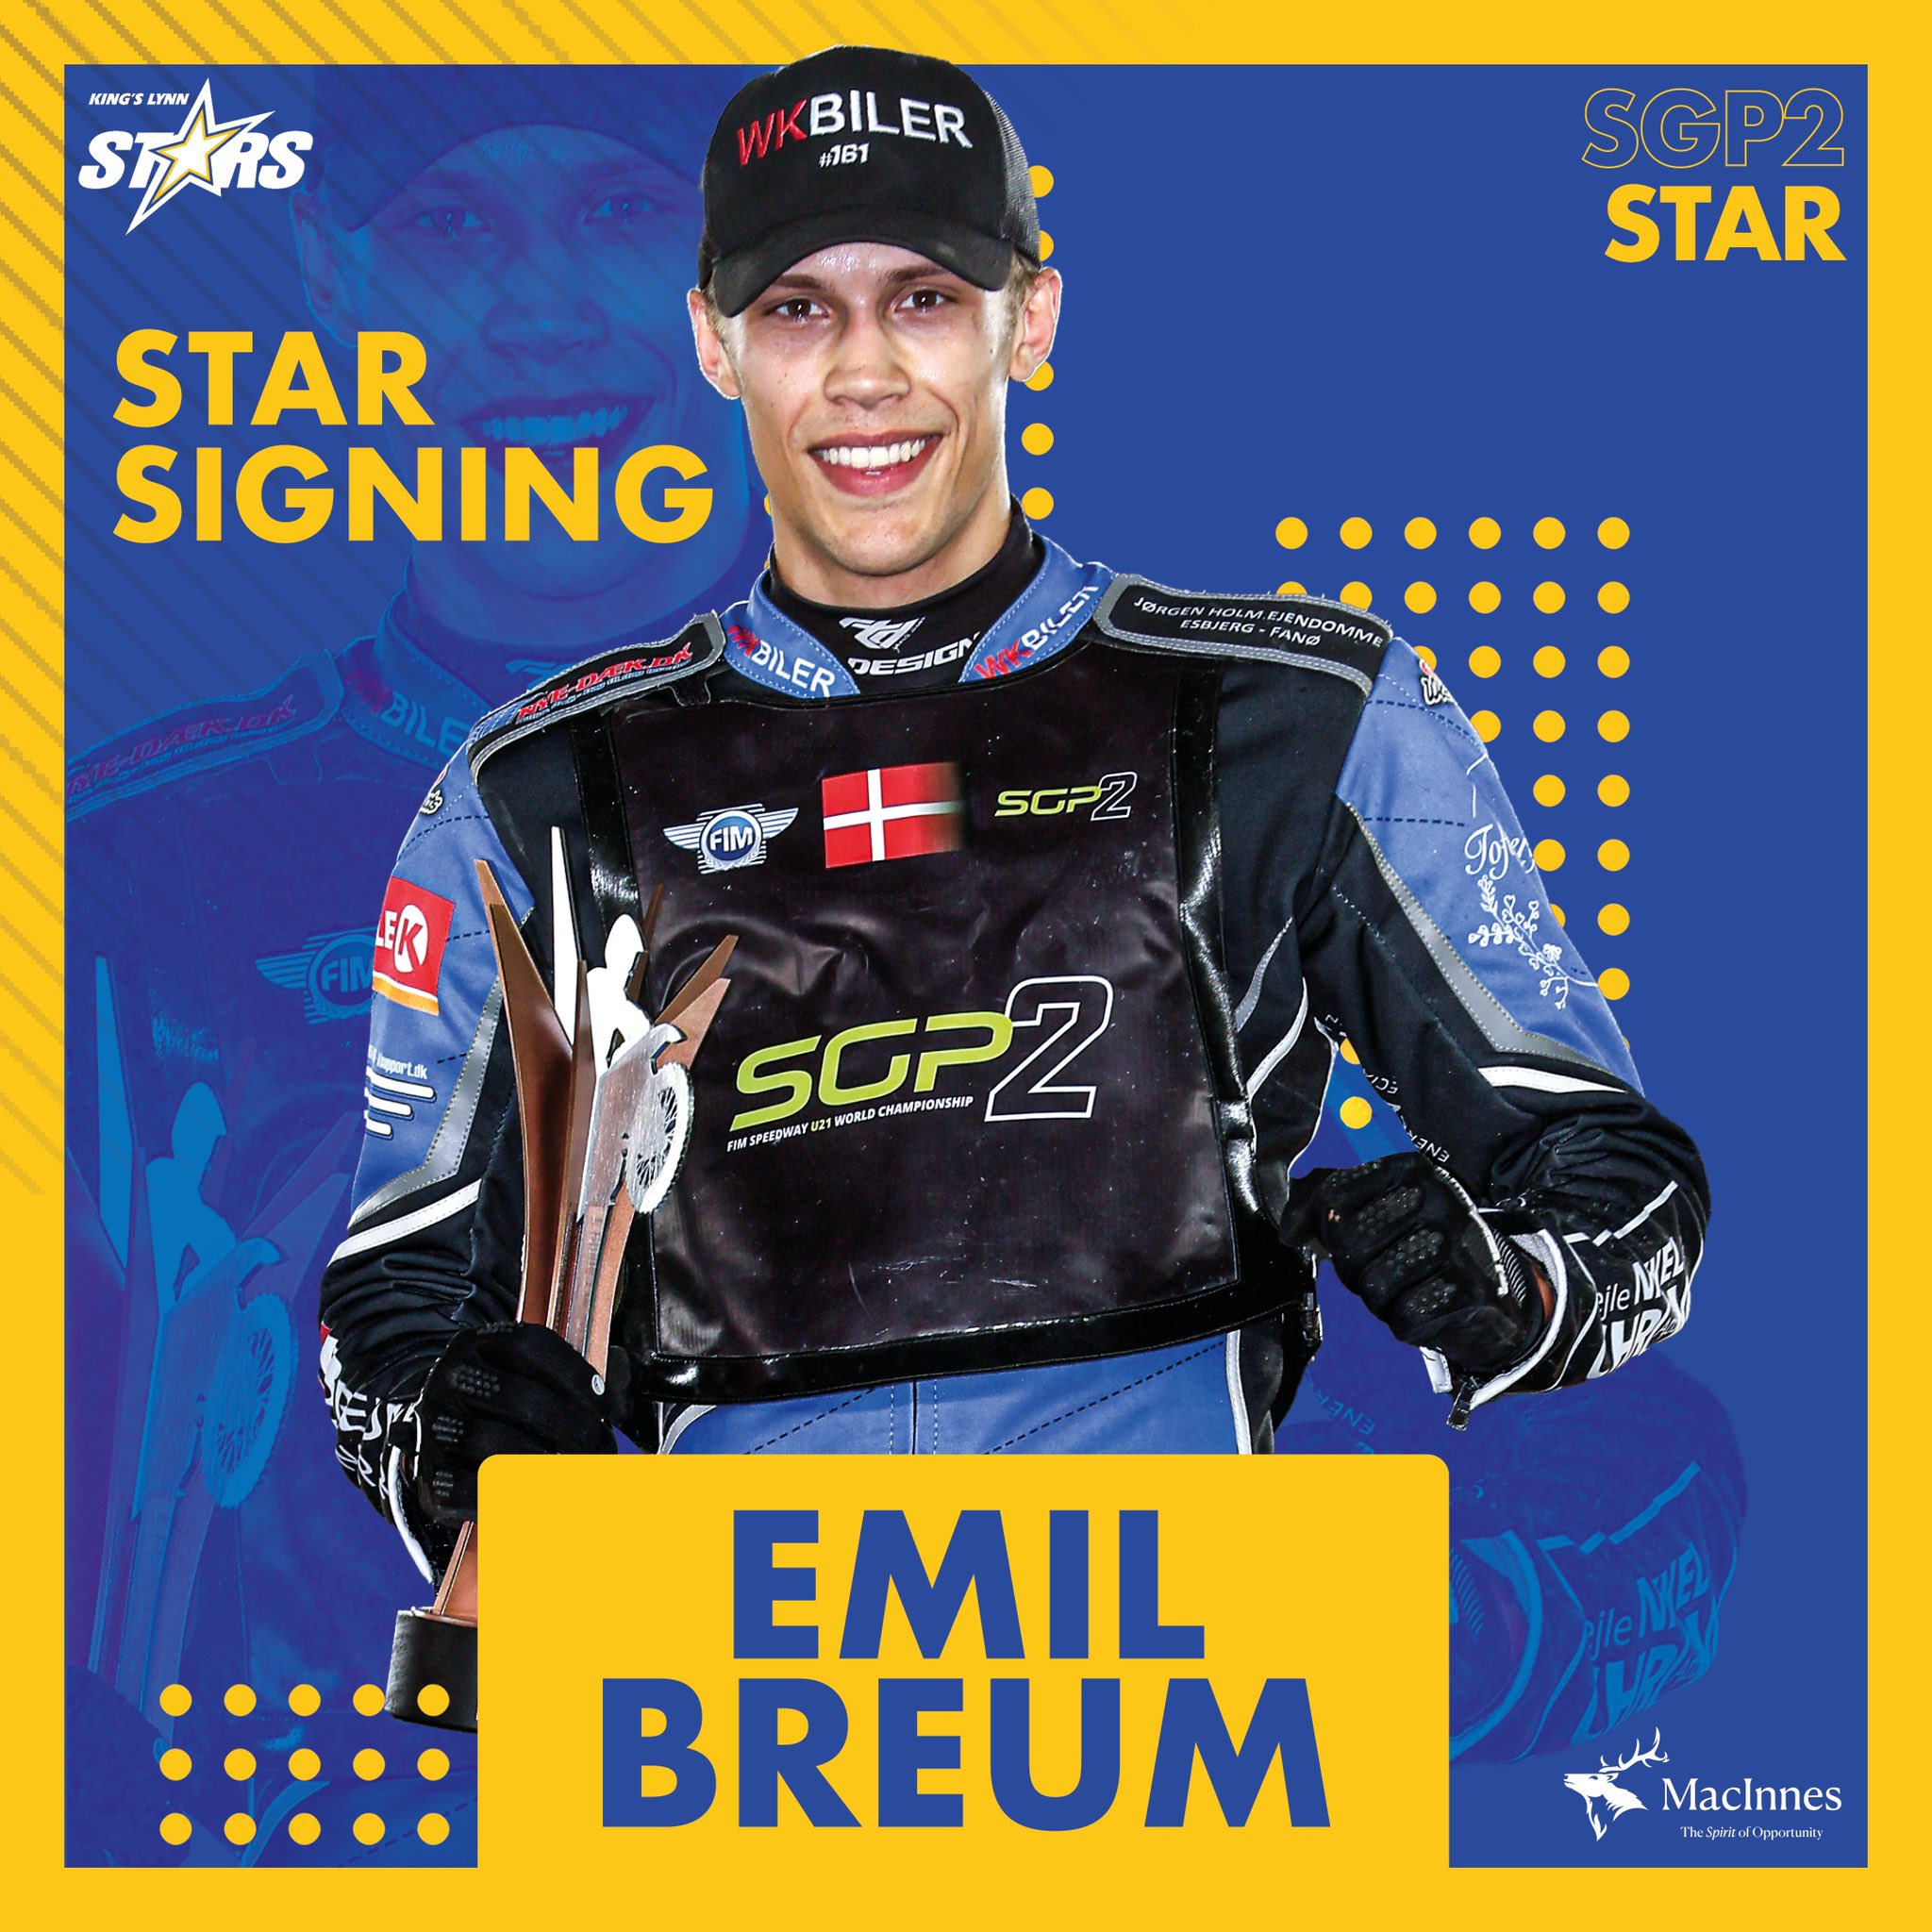 King's Lynn on X: "✍🏼🇩🇰 We have completed signing of Danish hot prospect Emil Breum - widely regarded as one of the sport's best young talents. 🗣 “I can't wait